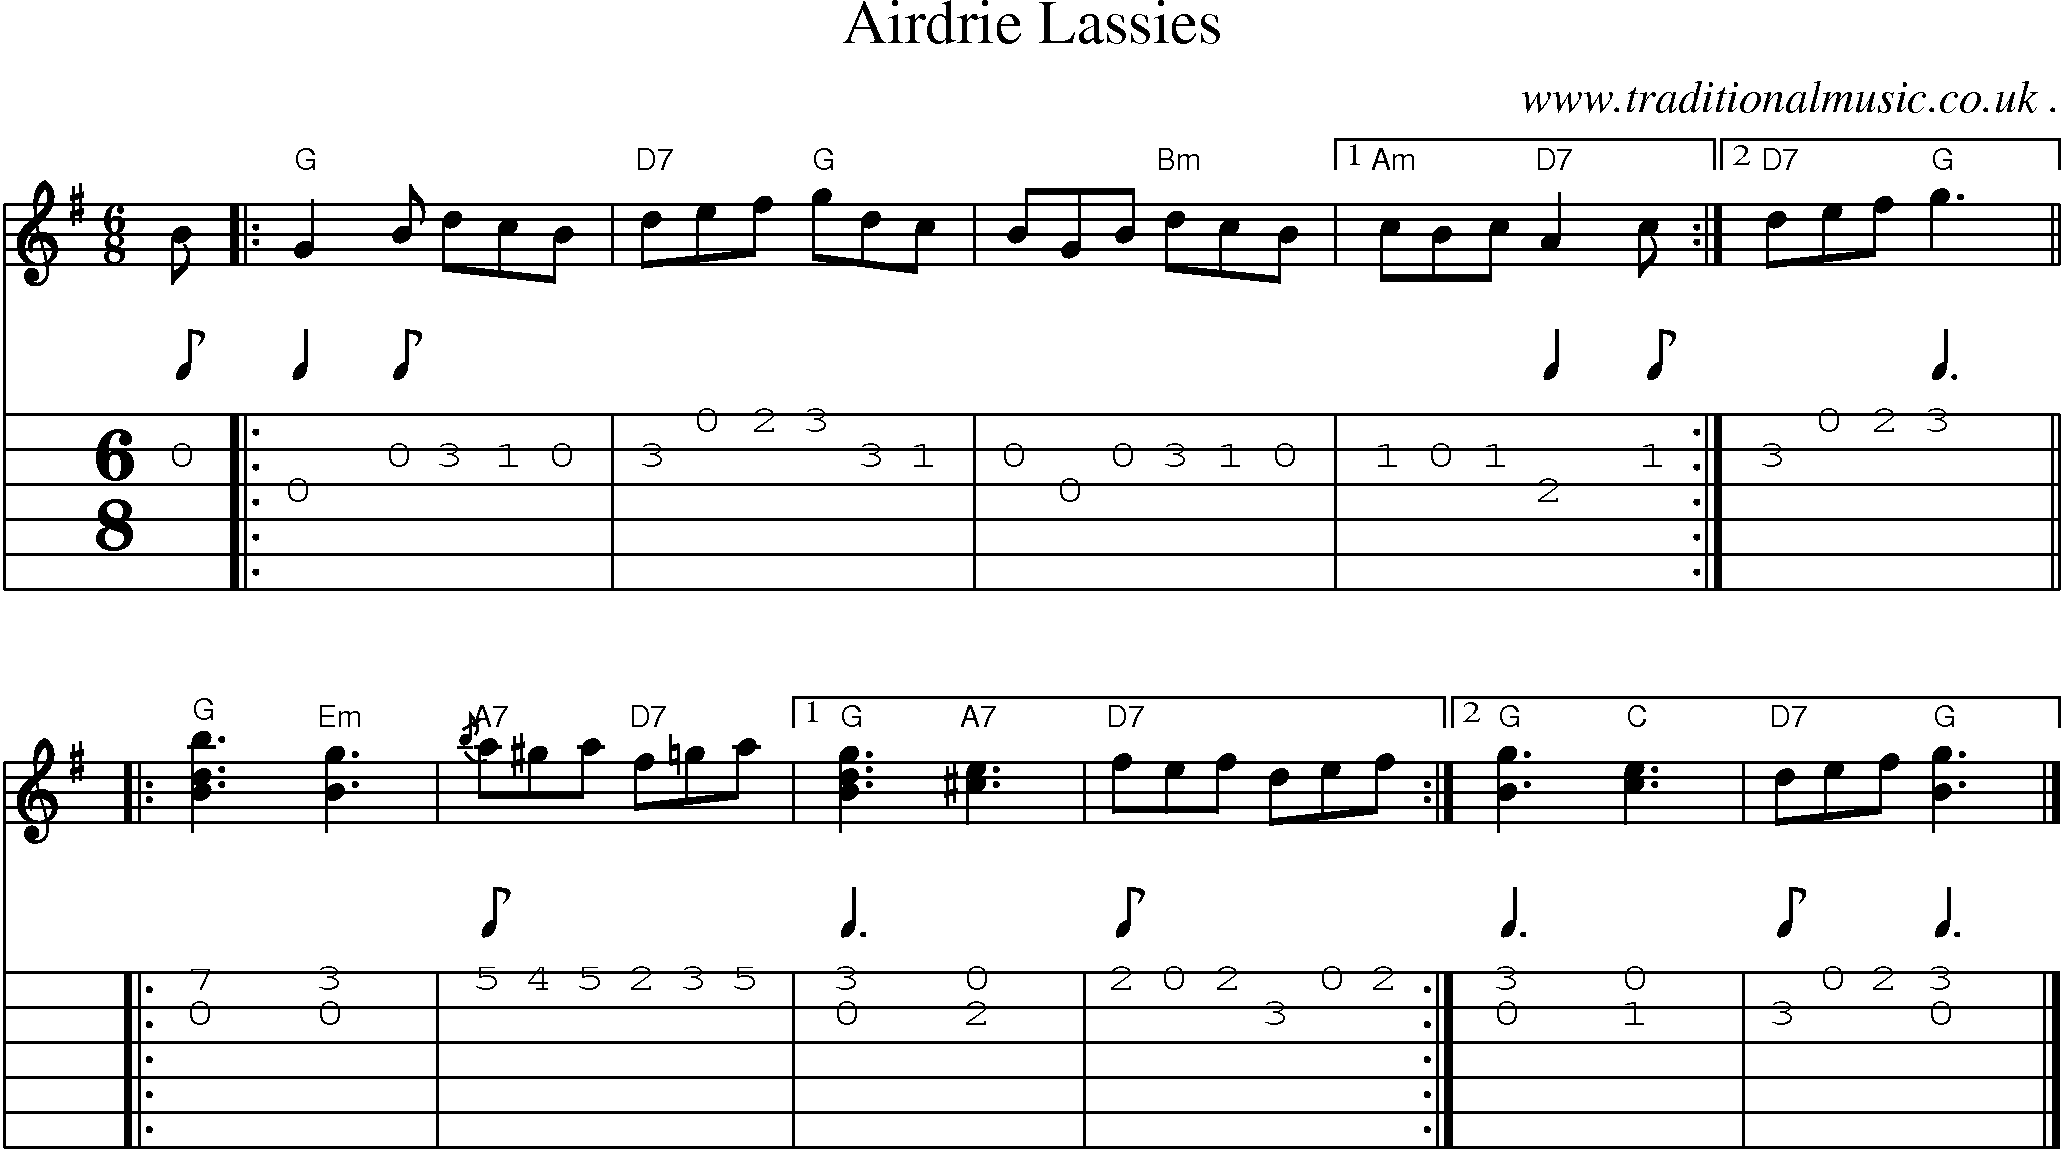 Sheet-music  score, Chords and Guitar Tabs for Airdrie Lassies